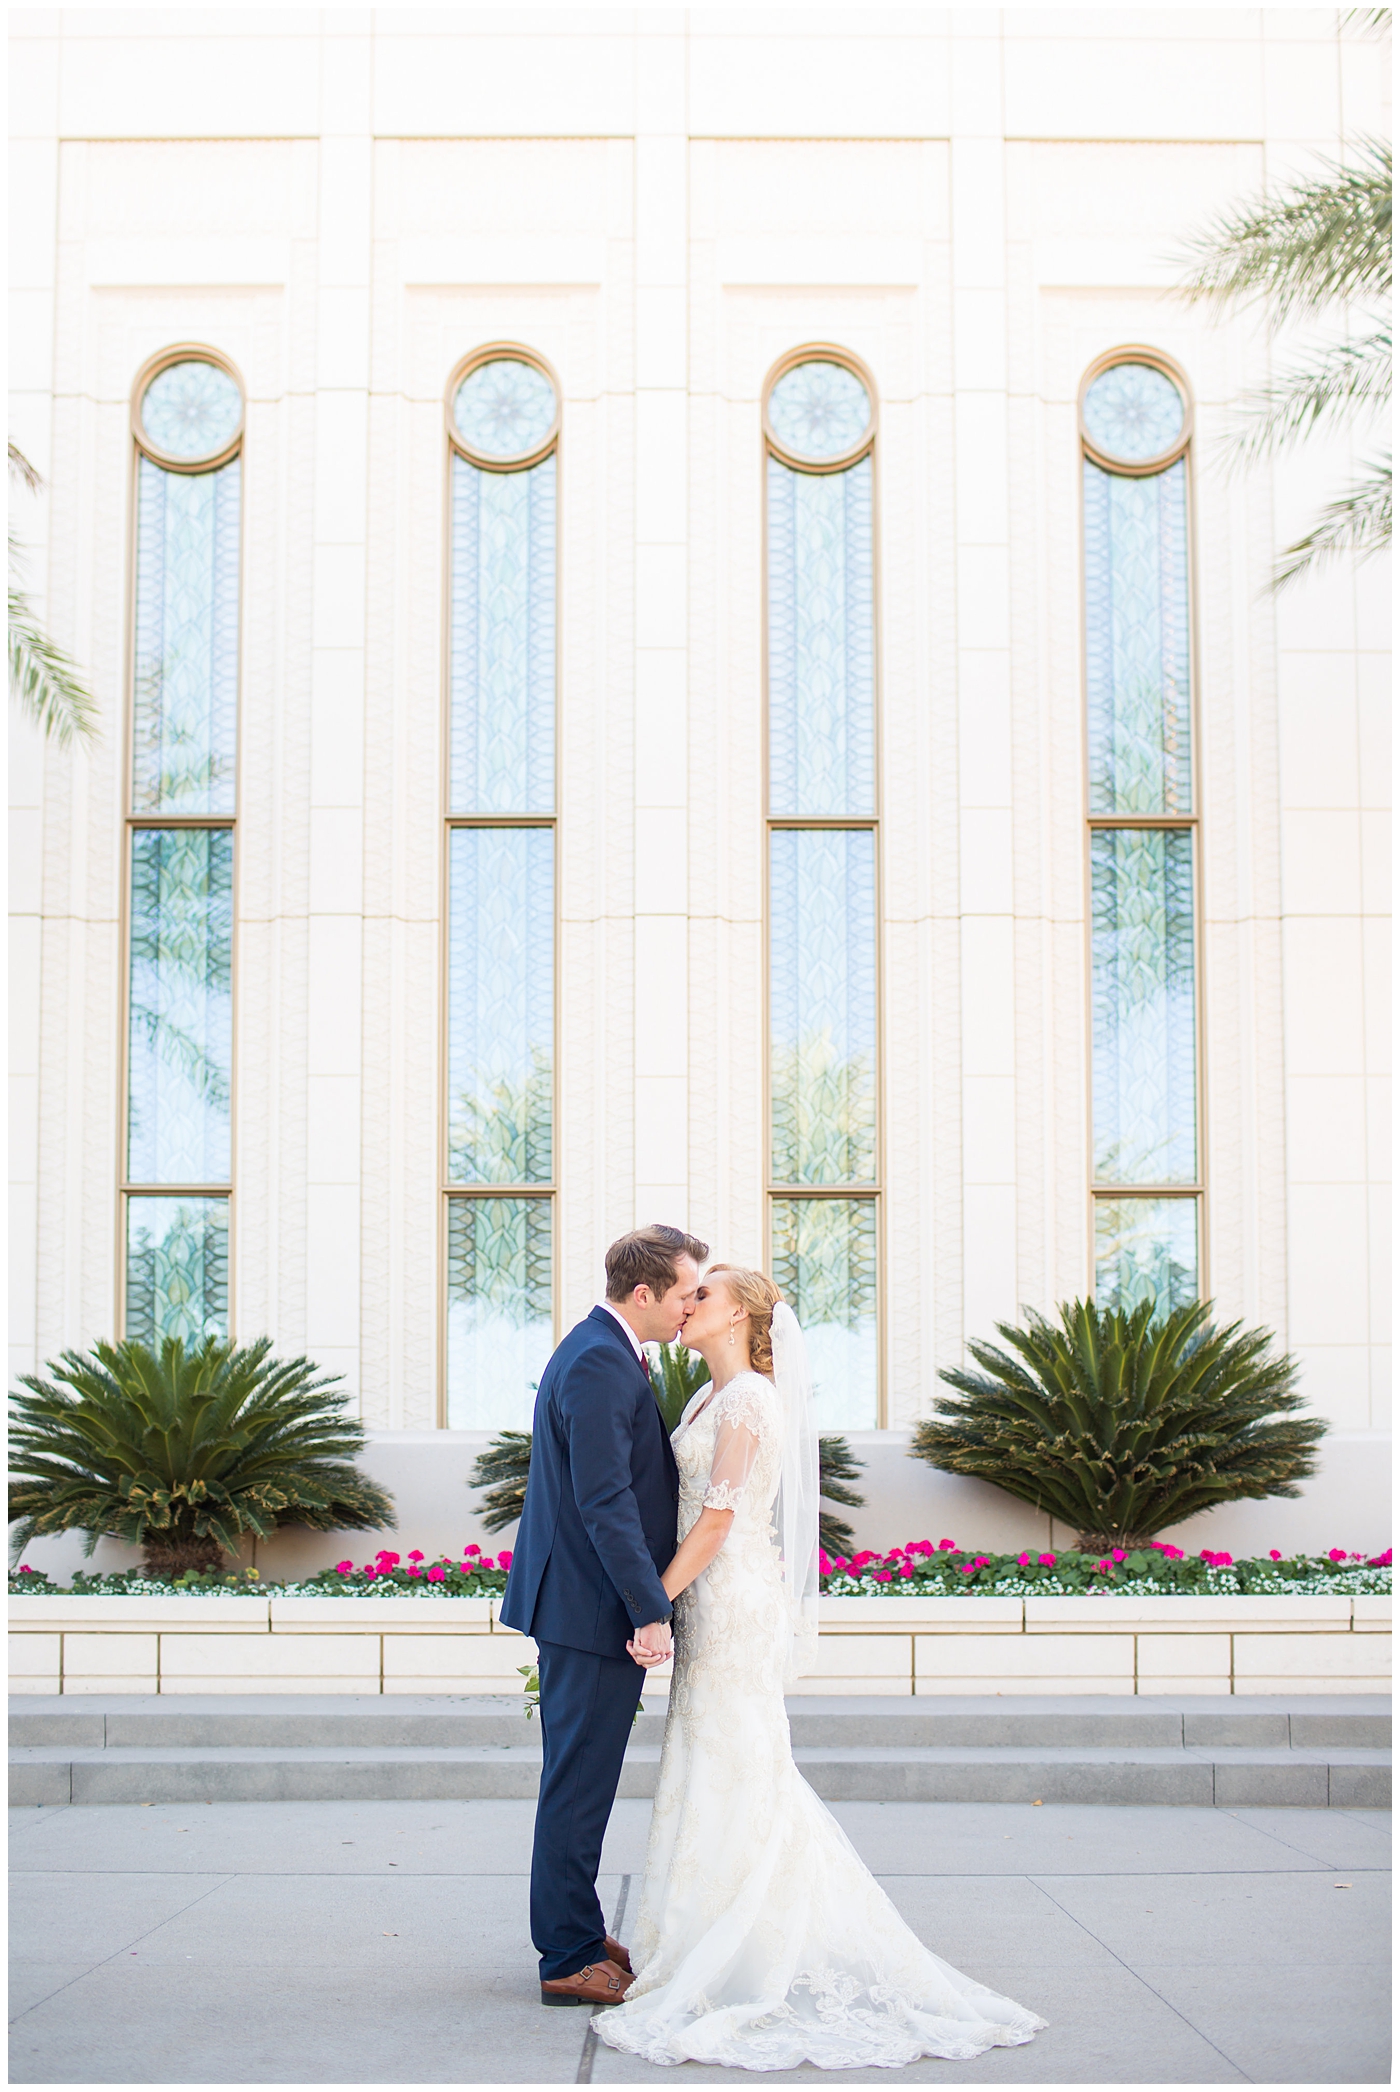 bride in sleeved lace dress with burgundy, white, and green wedding bouquet and groom in navy suit with burgundy tie wedding day portrait at Gilbert LDS temple